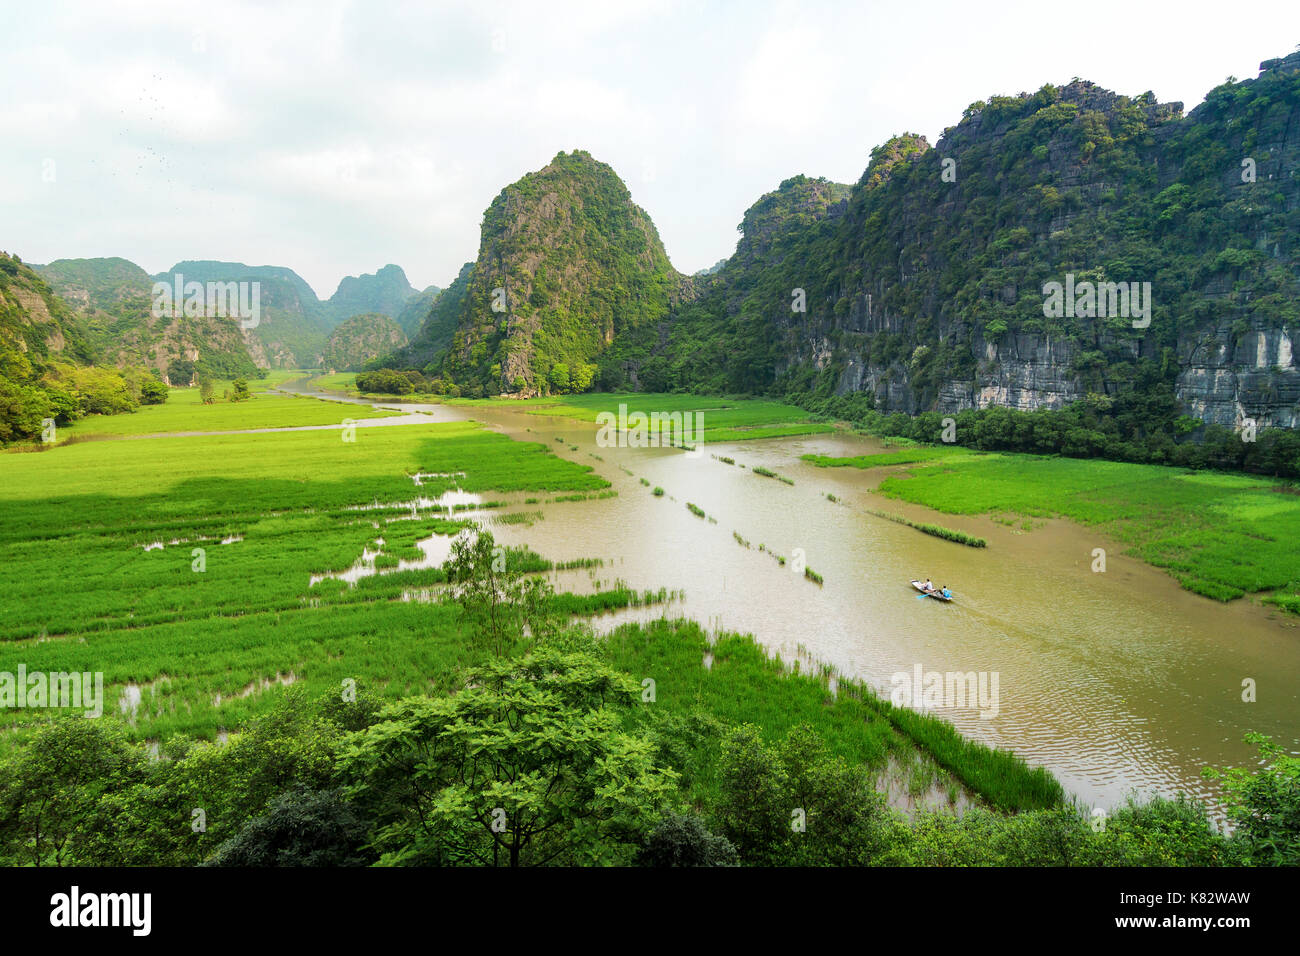 The Ngo Dong River, near Tam Coc village, at the Trang An UNESCO World Heritage site in Ninh Binh, Vietnam. Stock Photo